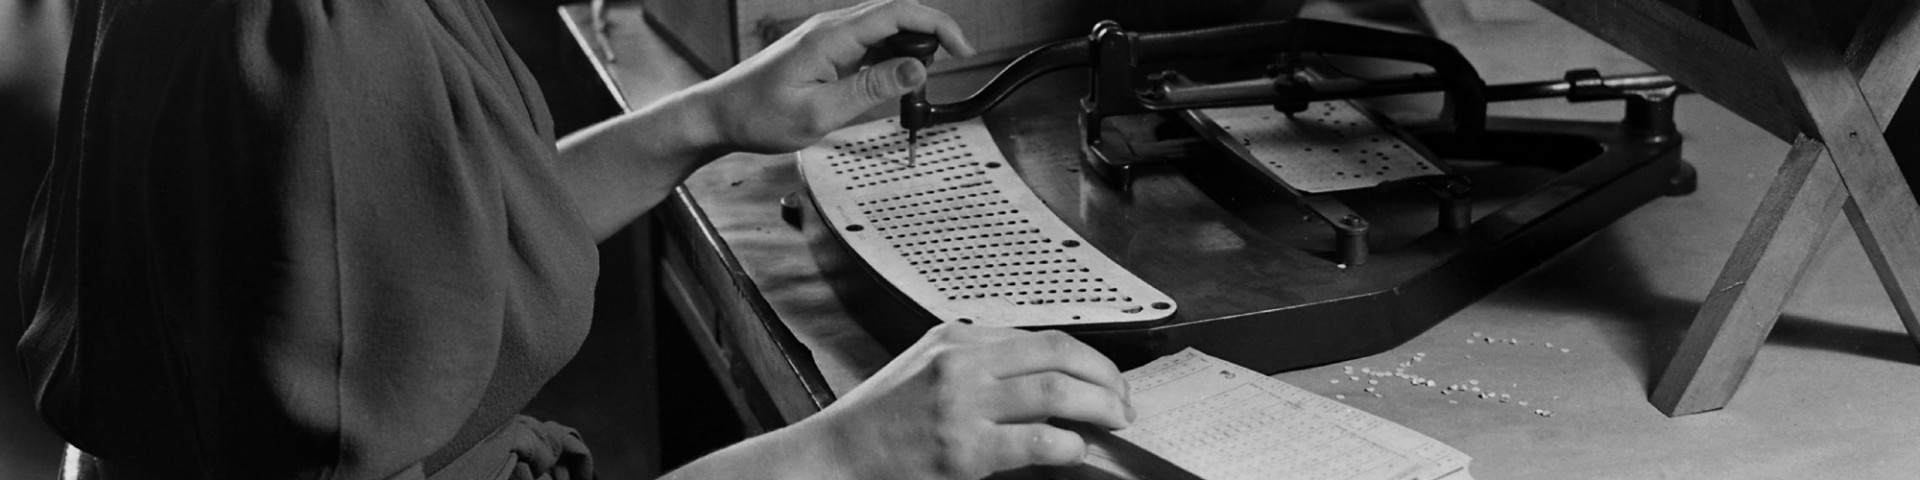 Bureaucracy, punch card machine operated by woman